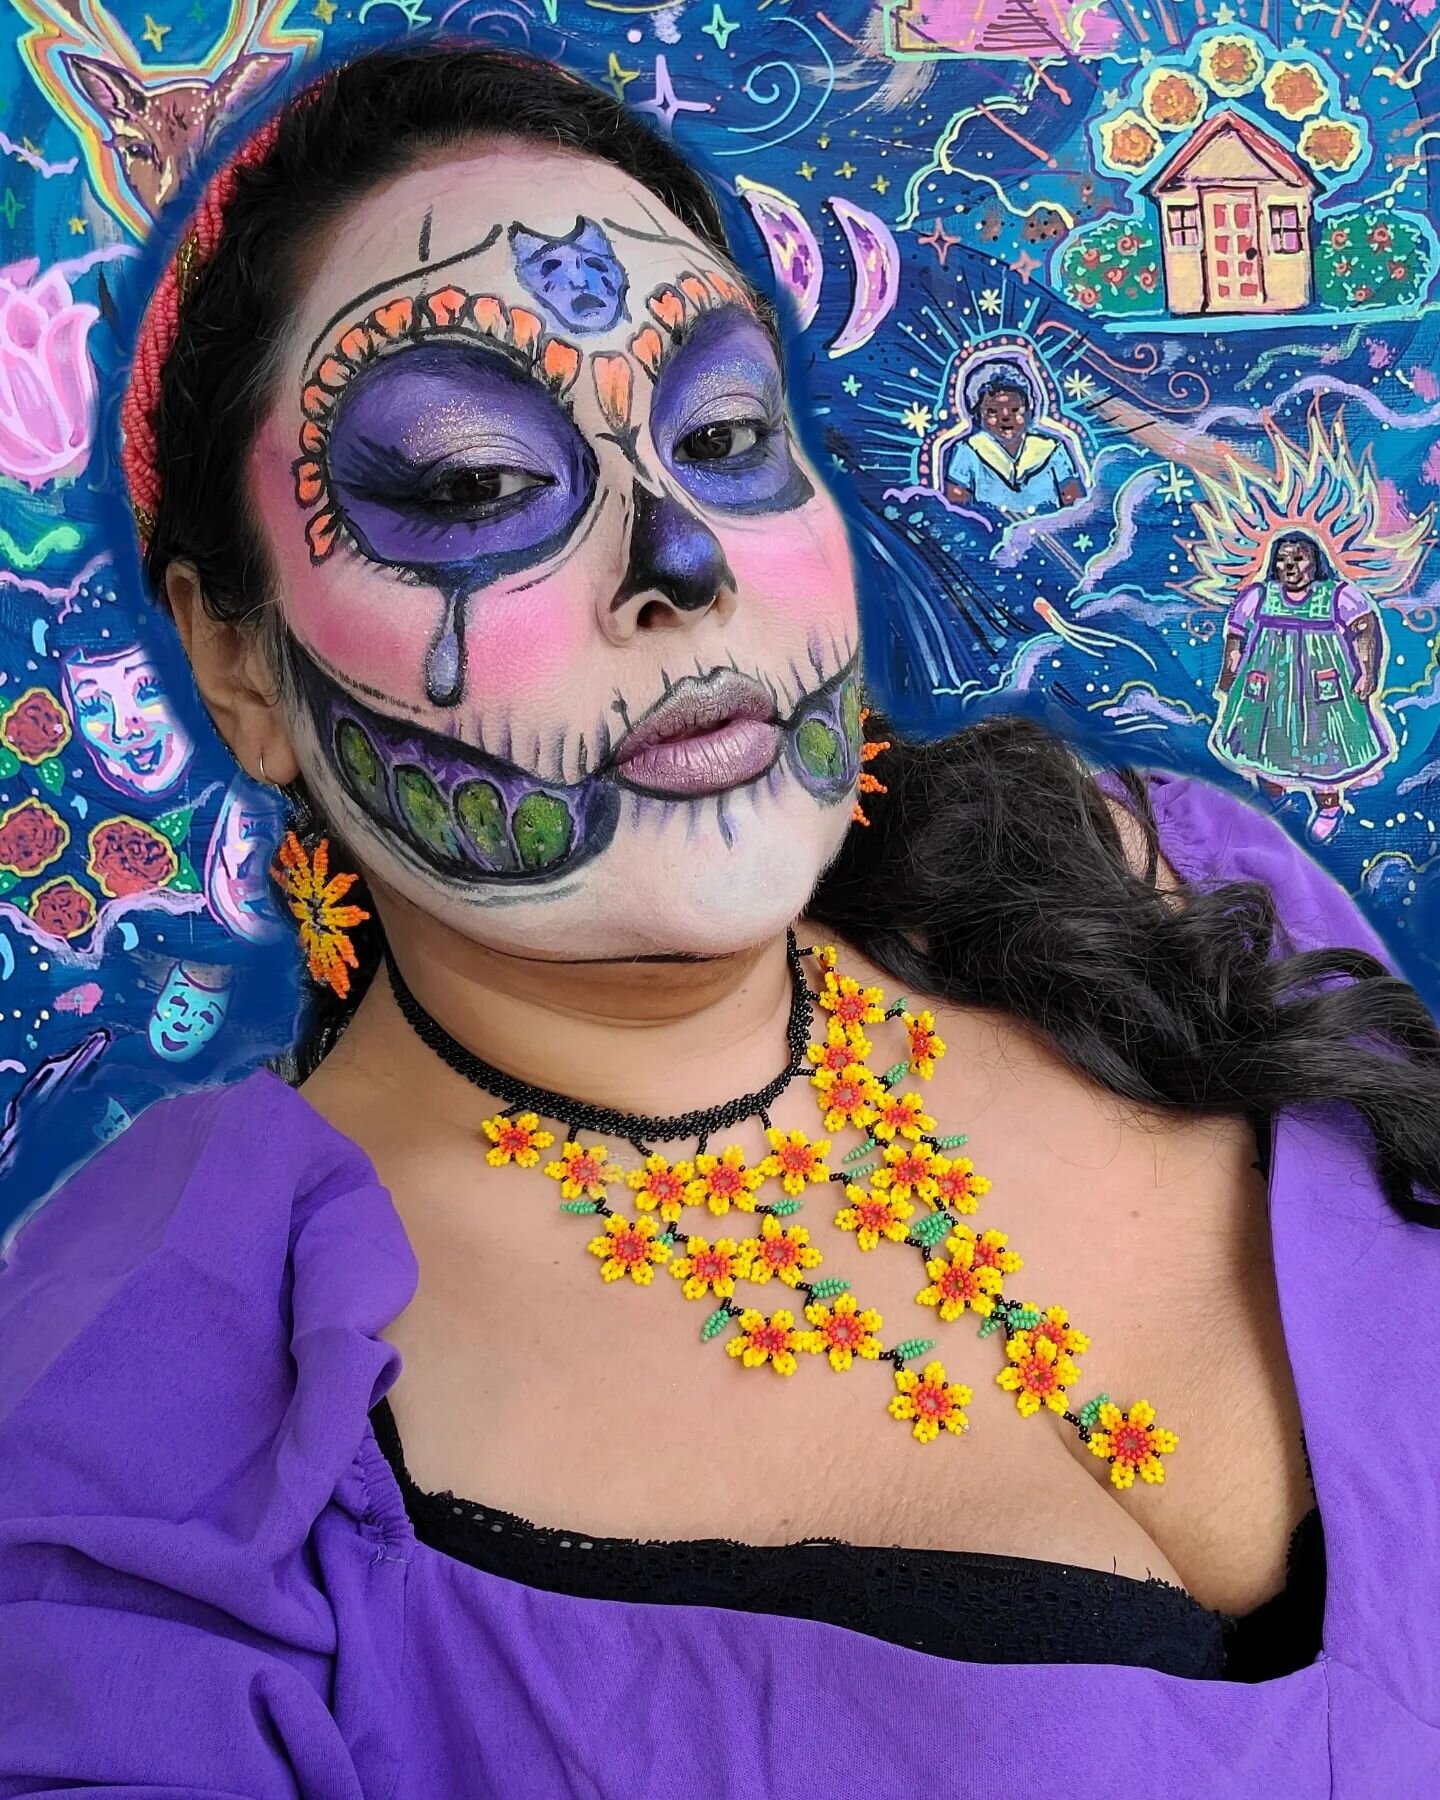 🏵🕯💀Dia de Muertos 2022.💀🕯🏵
I hope they can feel how much love I put into my ofrendas of food, altar making and art. I hope they are proud of me.